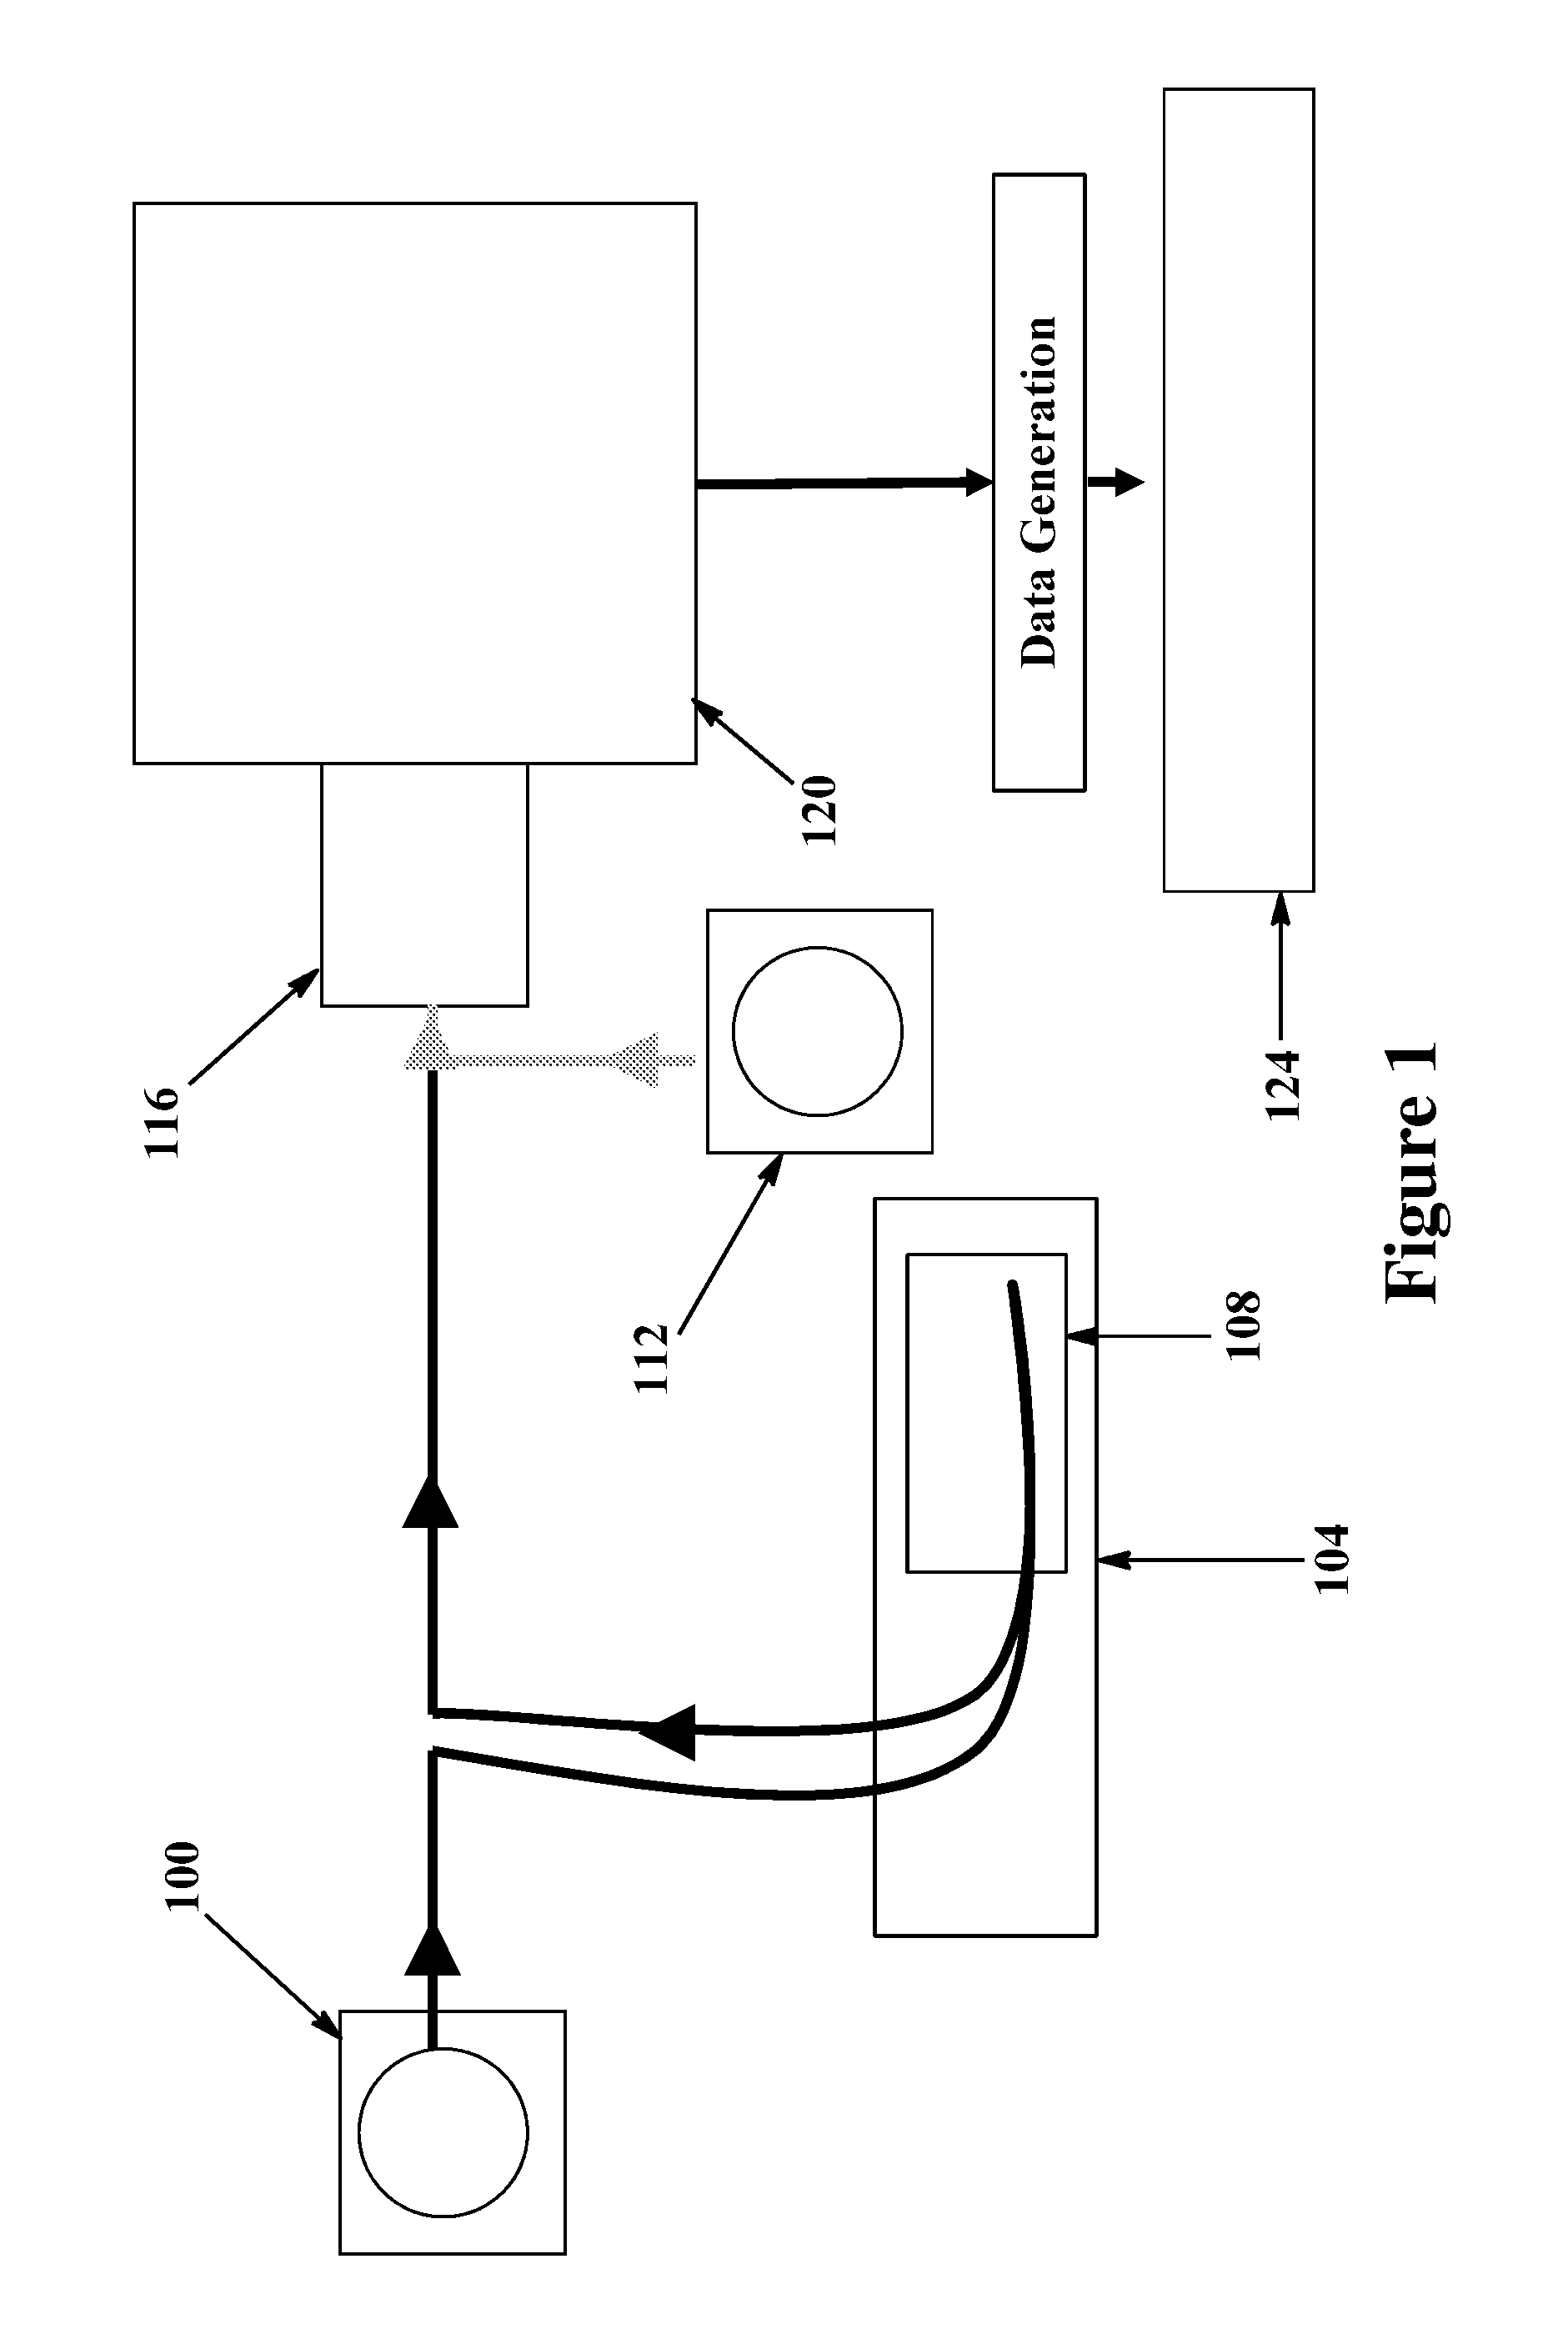 Methods and systems for in vivo clinical data measurement of analytes